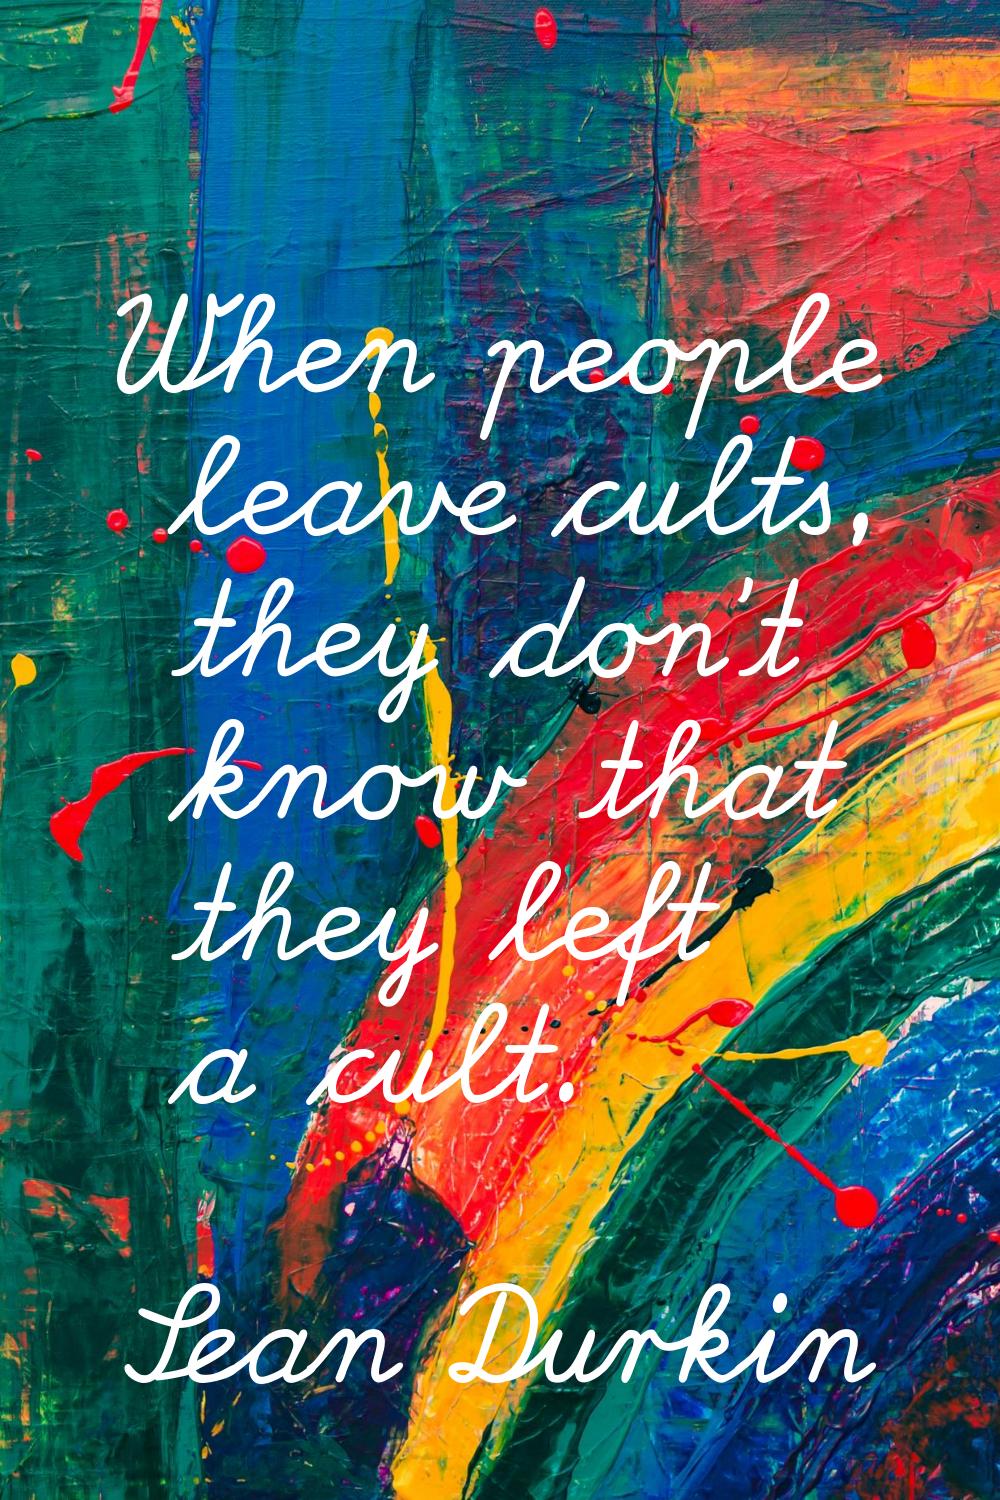 When people leave cults, they don't know that they left a cult.